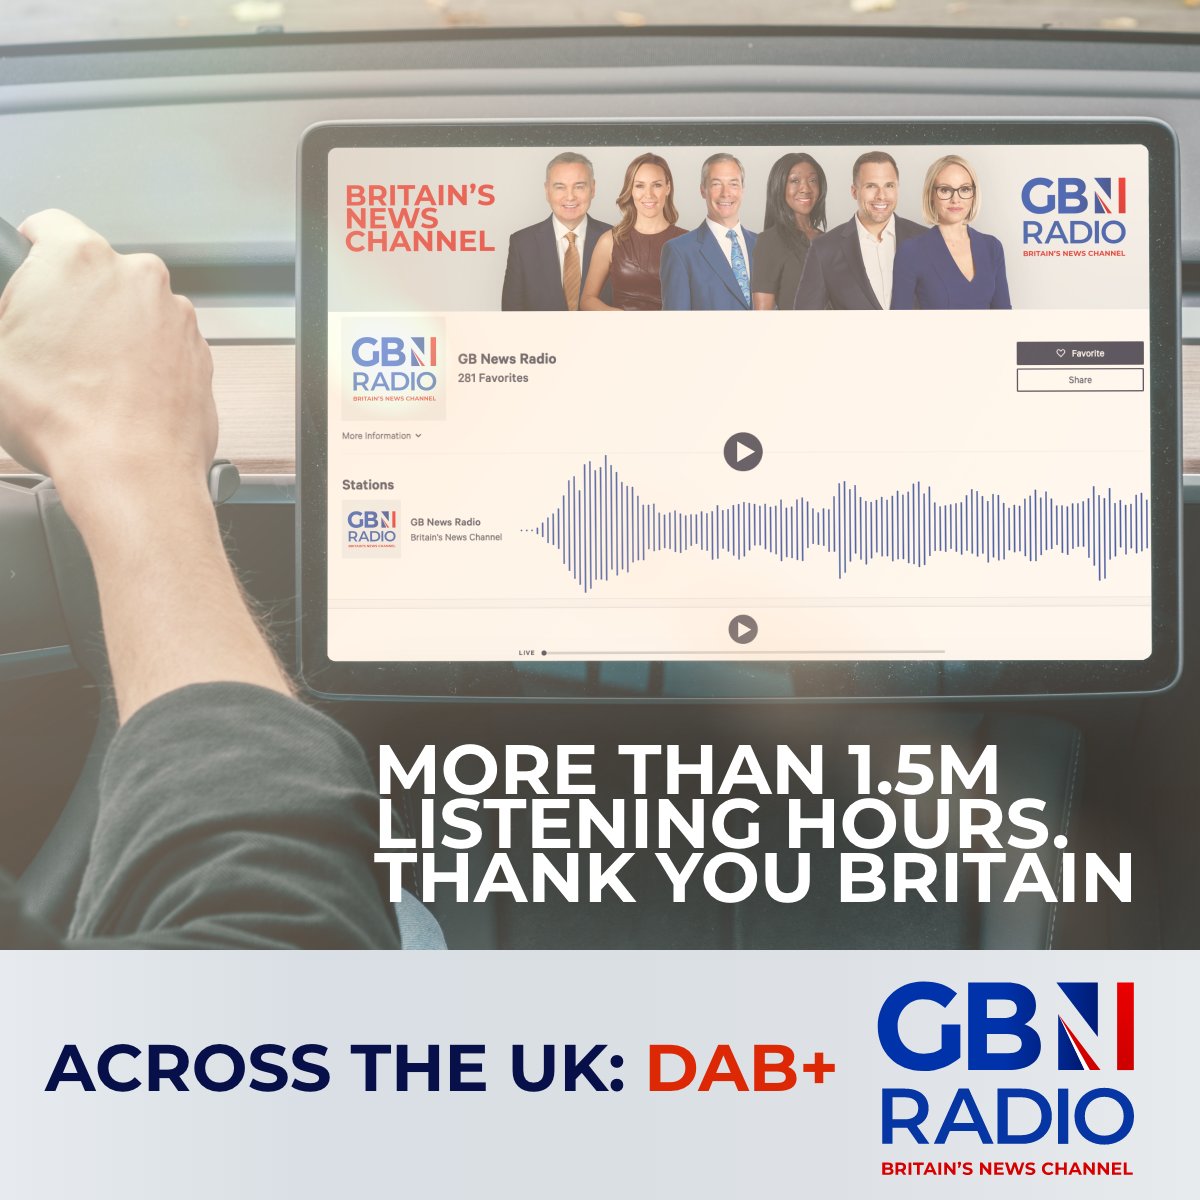 por no mencionar Salvaje realidad GB News on Twitter: "📻 GB News Radio is the fastest growing station  targeting UK audiences. 239,000 of you listen to the People's Channel each  week. Thank you for listening. We are